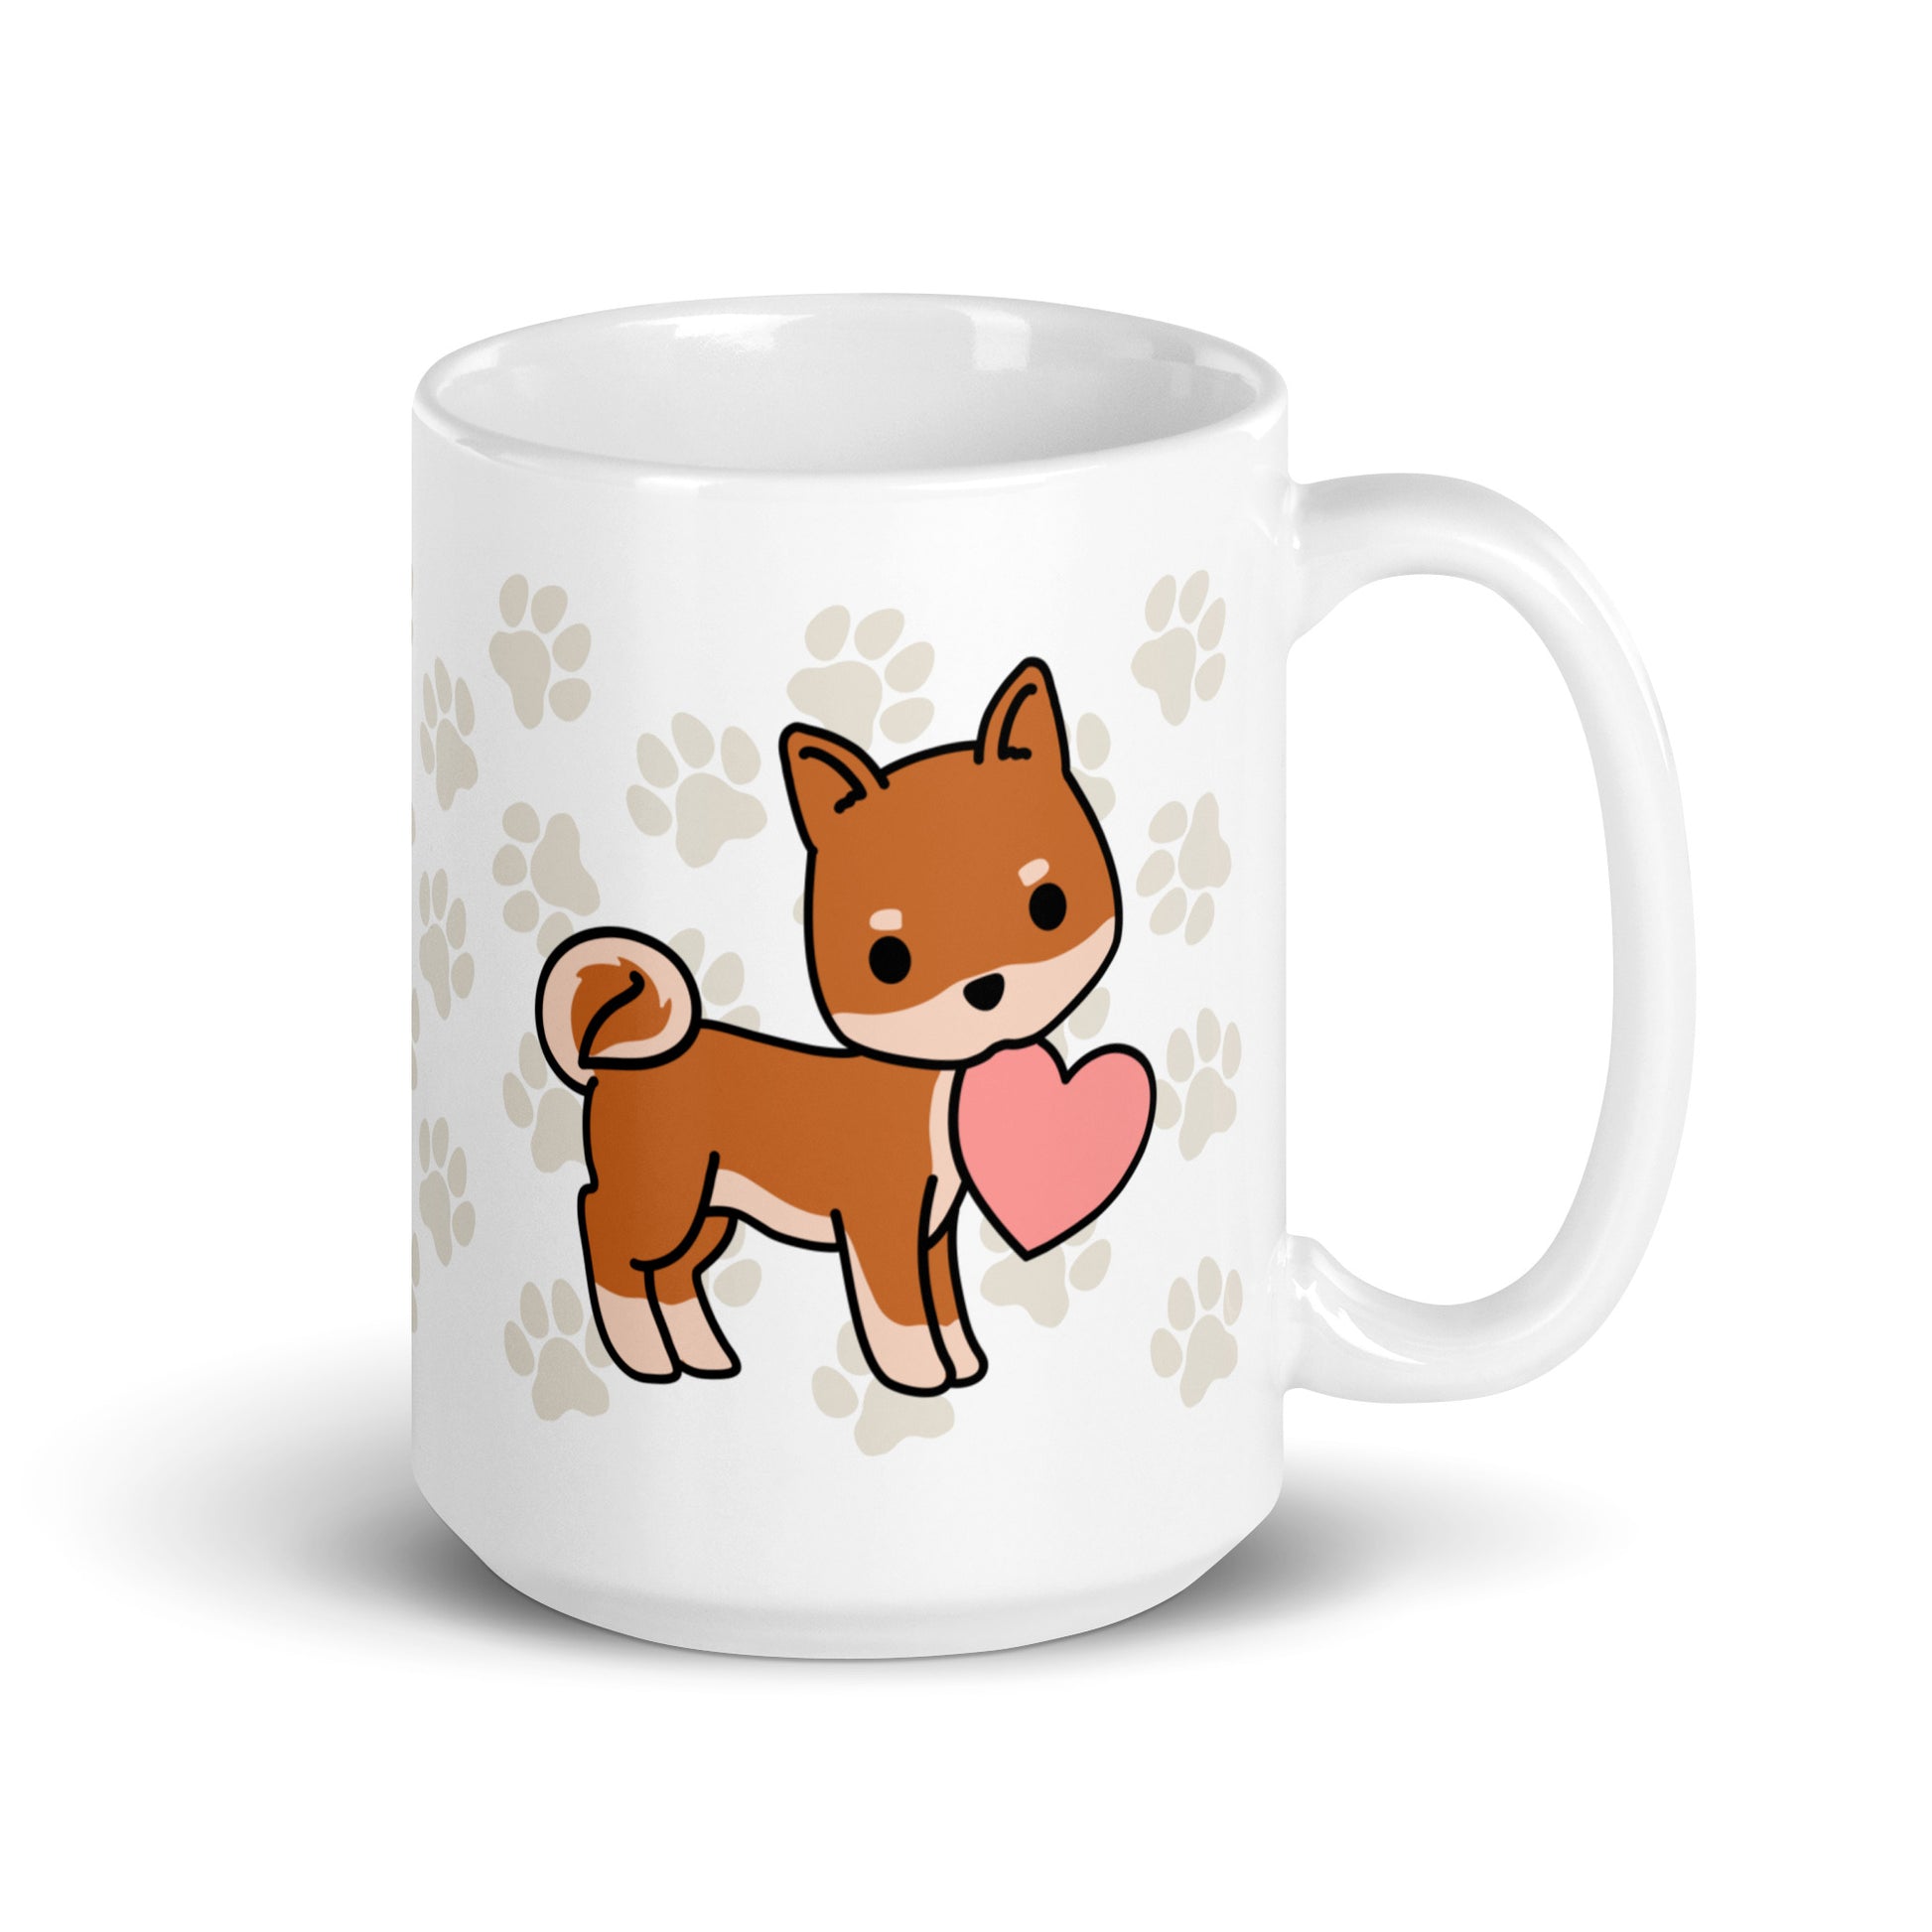 A white 15 ounce ceramic mug with a pattern of light brown pawprints all over. The mug also features a stylized illustration of a Shiba Inu holding a heart in its mouth.